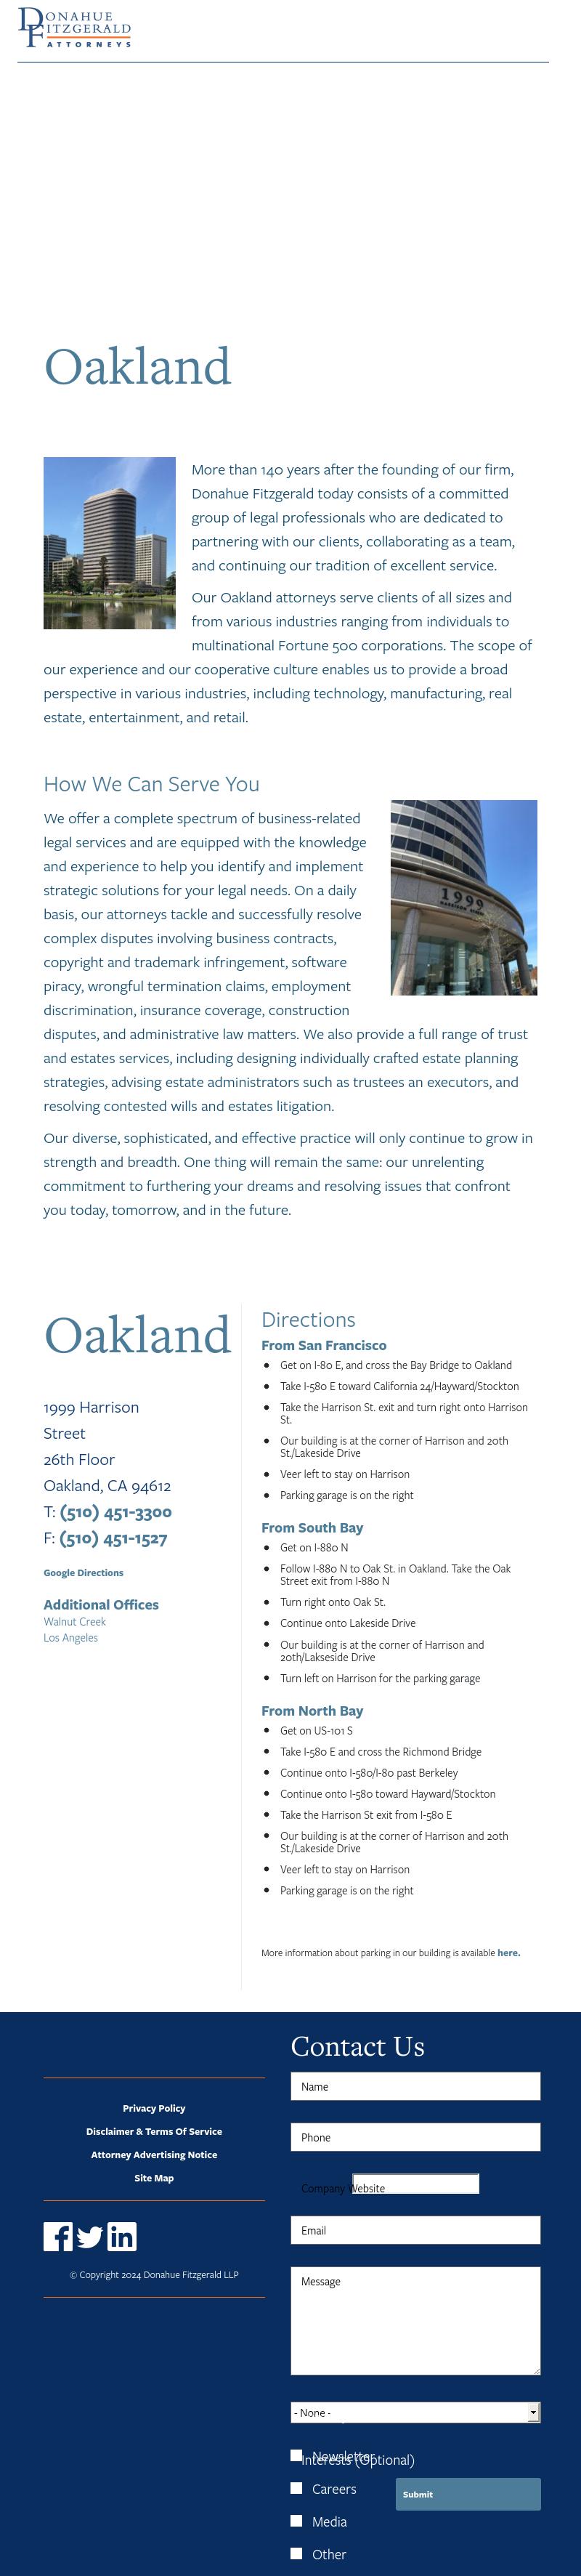 Donahue Fitzgerald of Oakland - Oakland CA Lawyers